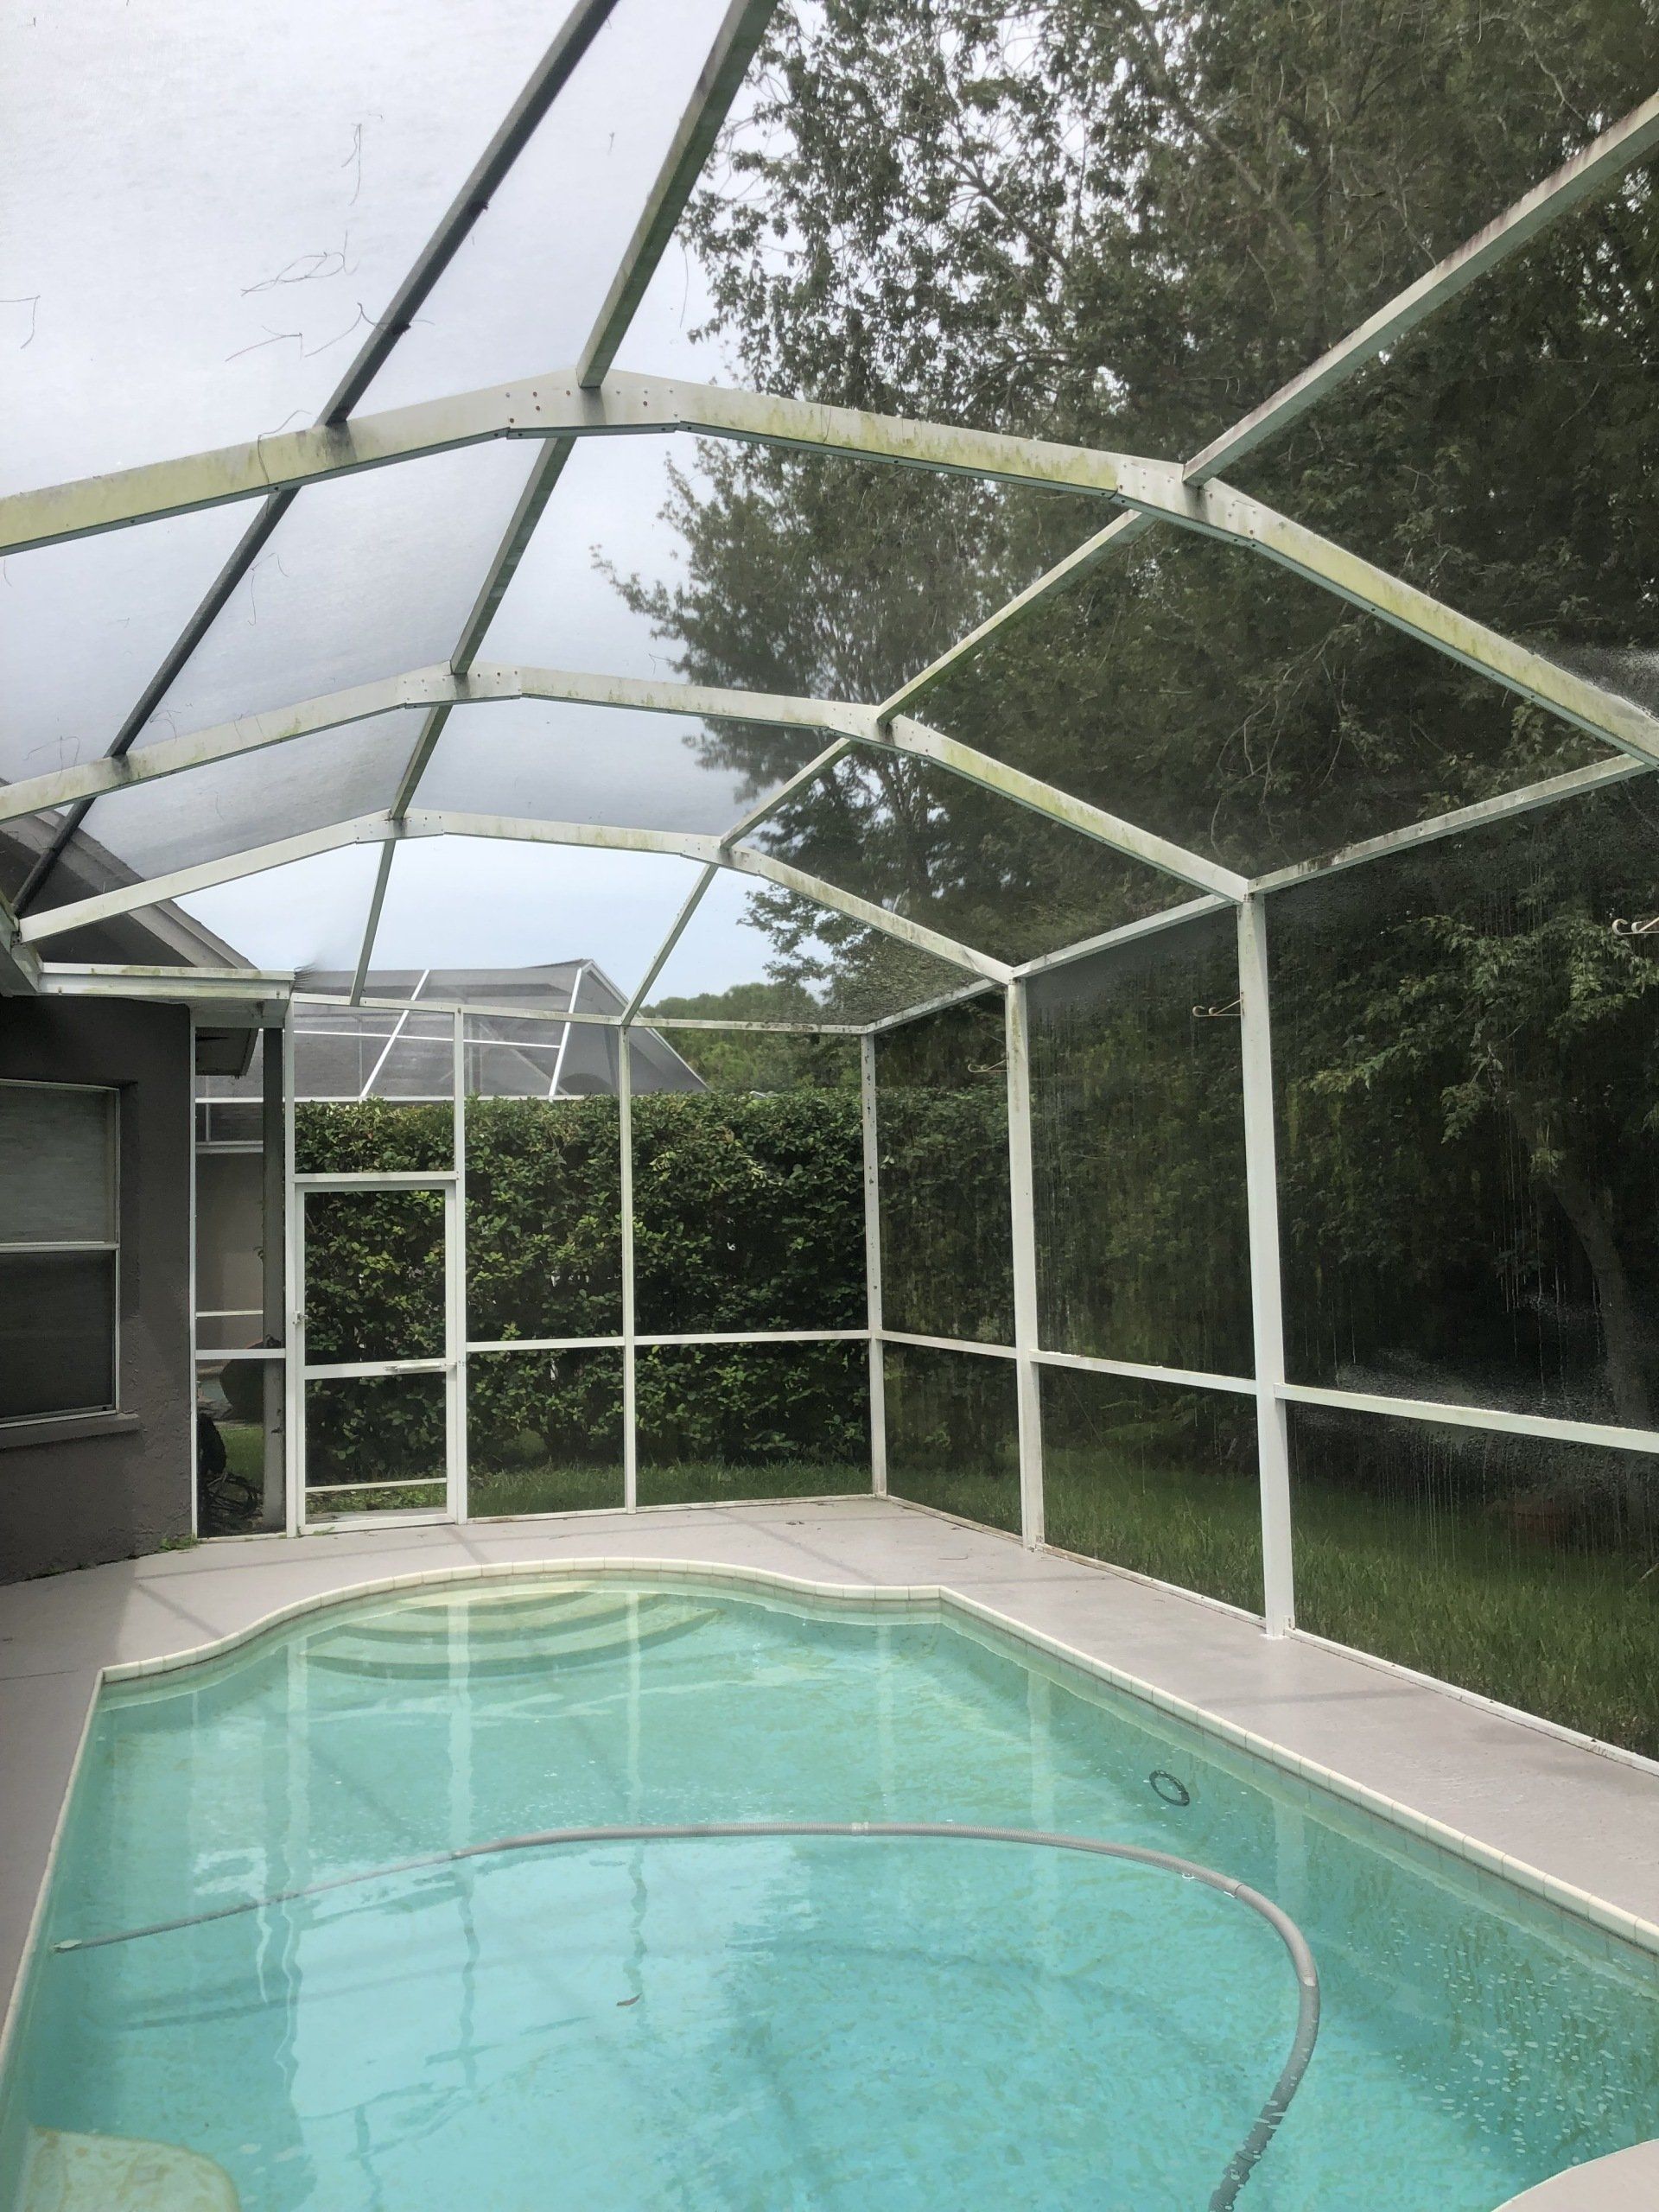 Dirty Pool cage | Tampa, FL | First Response Pressure Wash